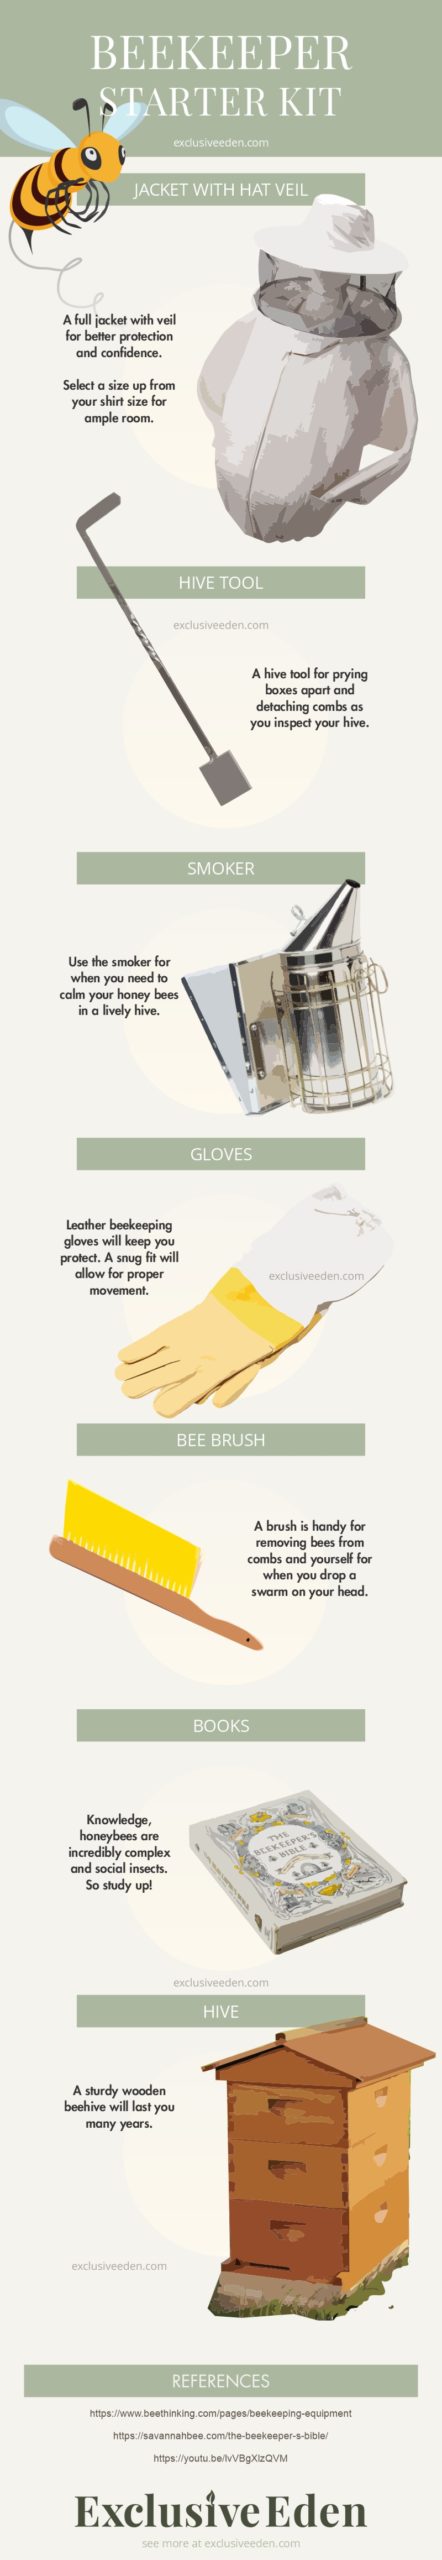 An infographic illustrated guide to getting started with beekeeping.